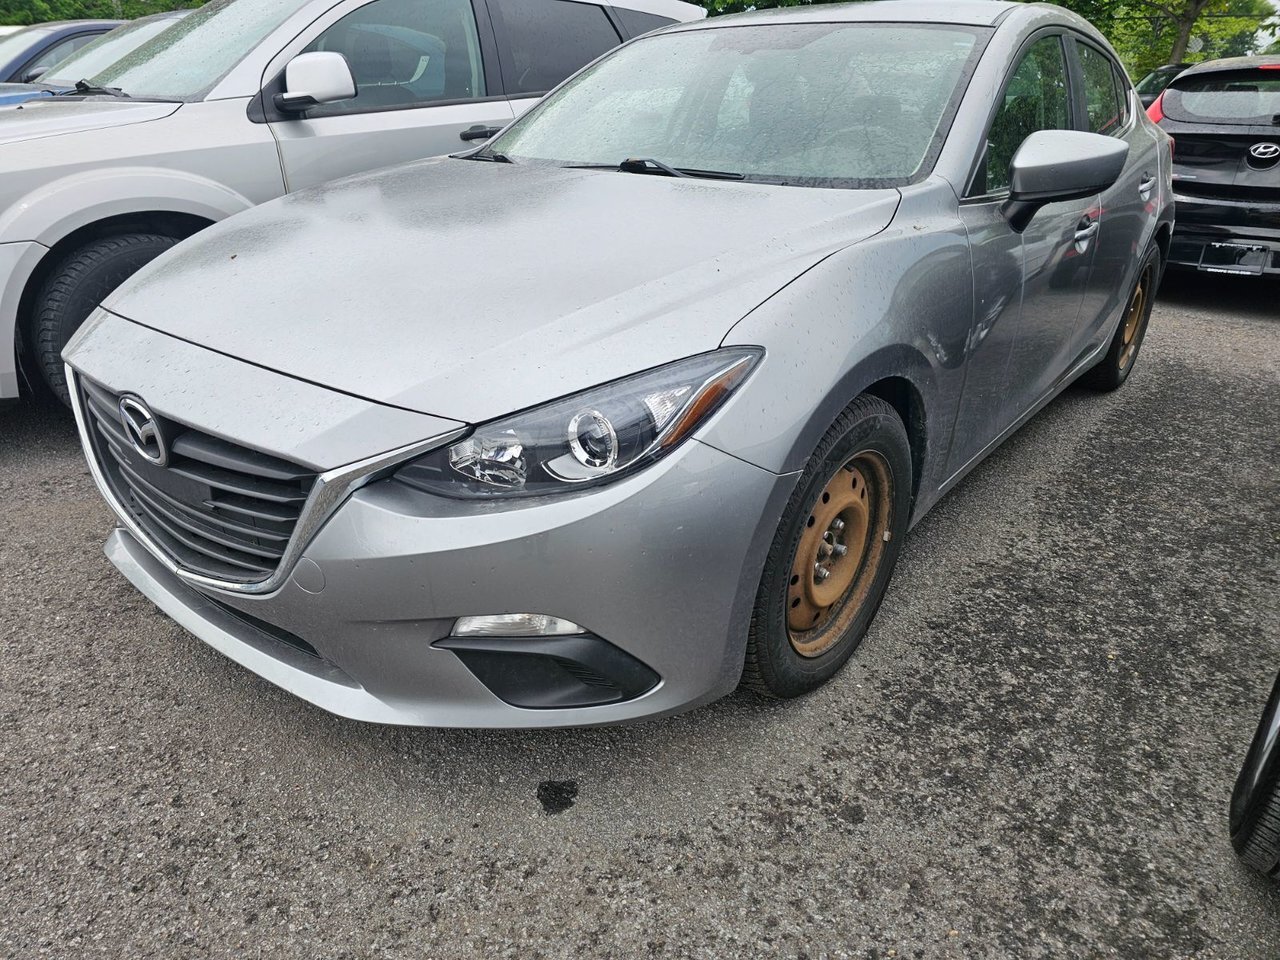 2014 Mazda Mazda3 GS-SKY AIR CONDITIONING + BLUETOOTH + REAR UP CAME